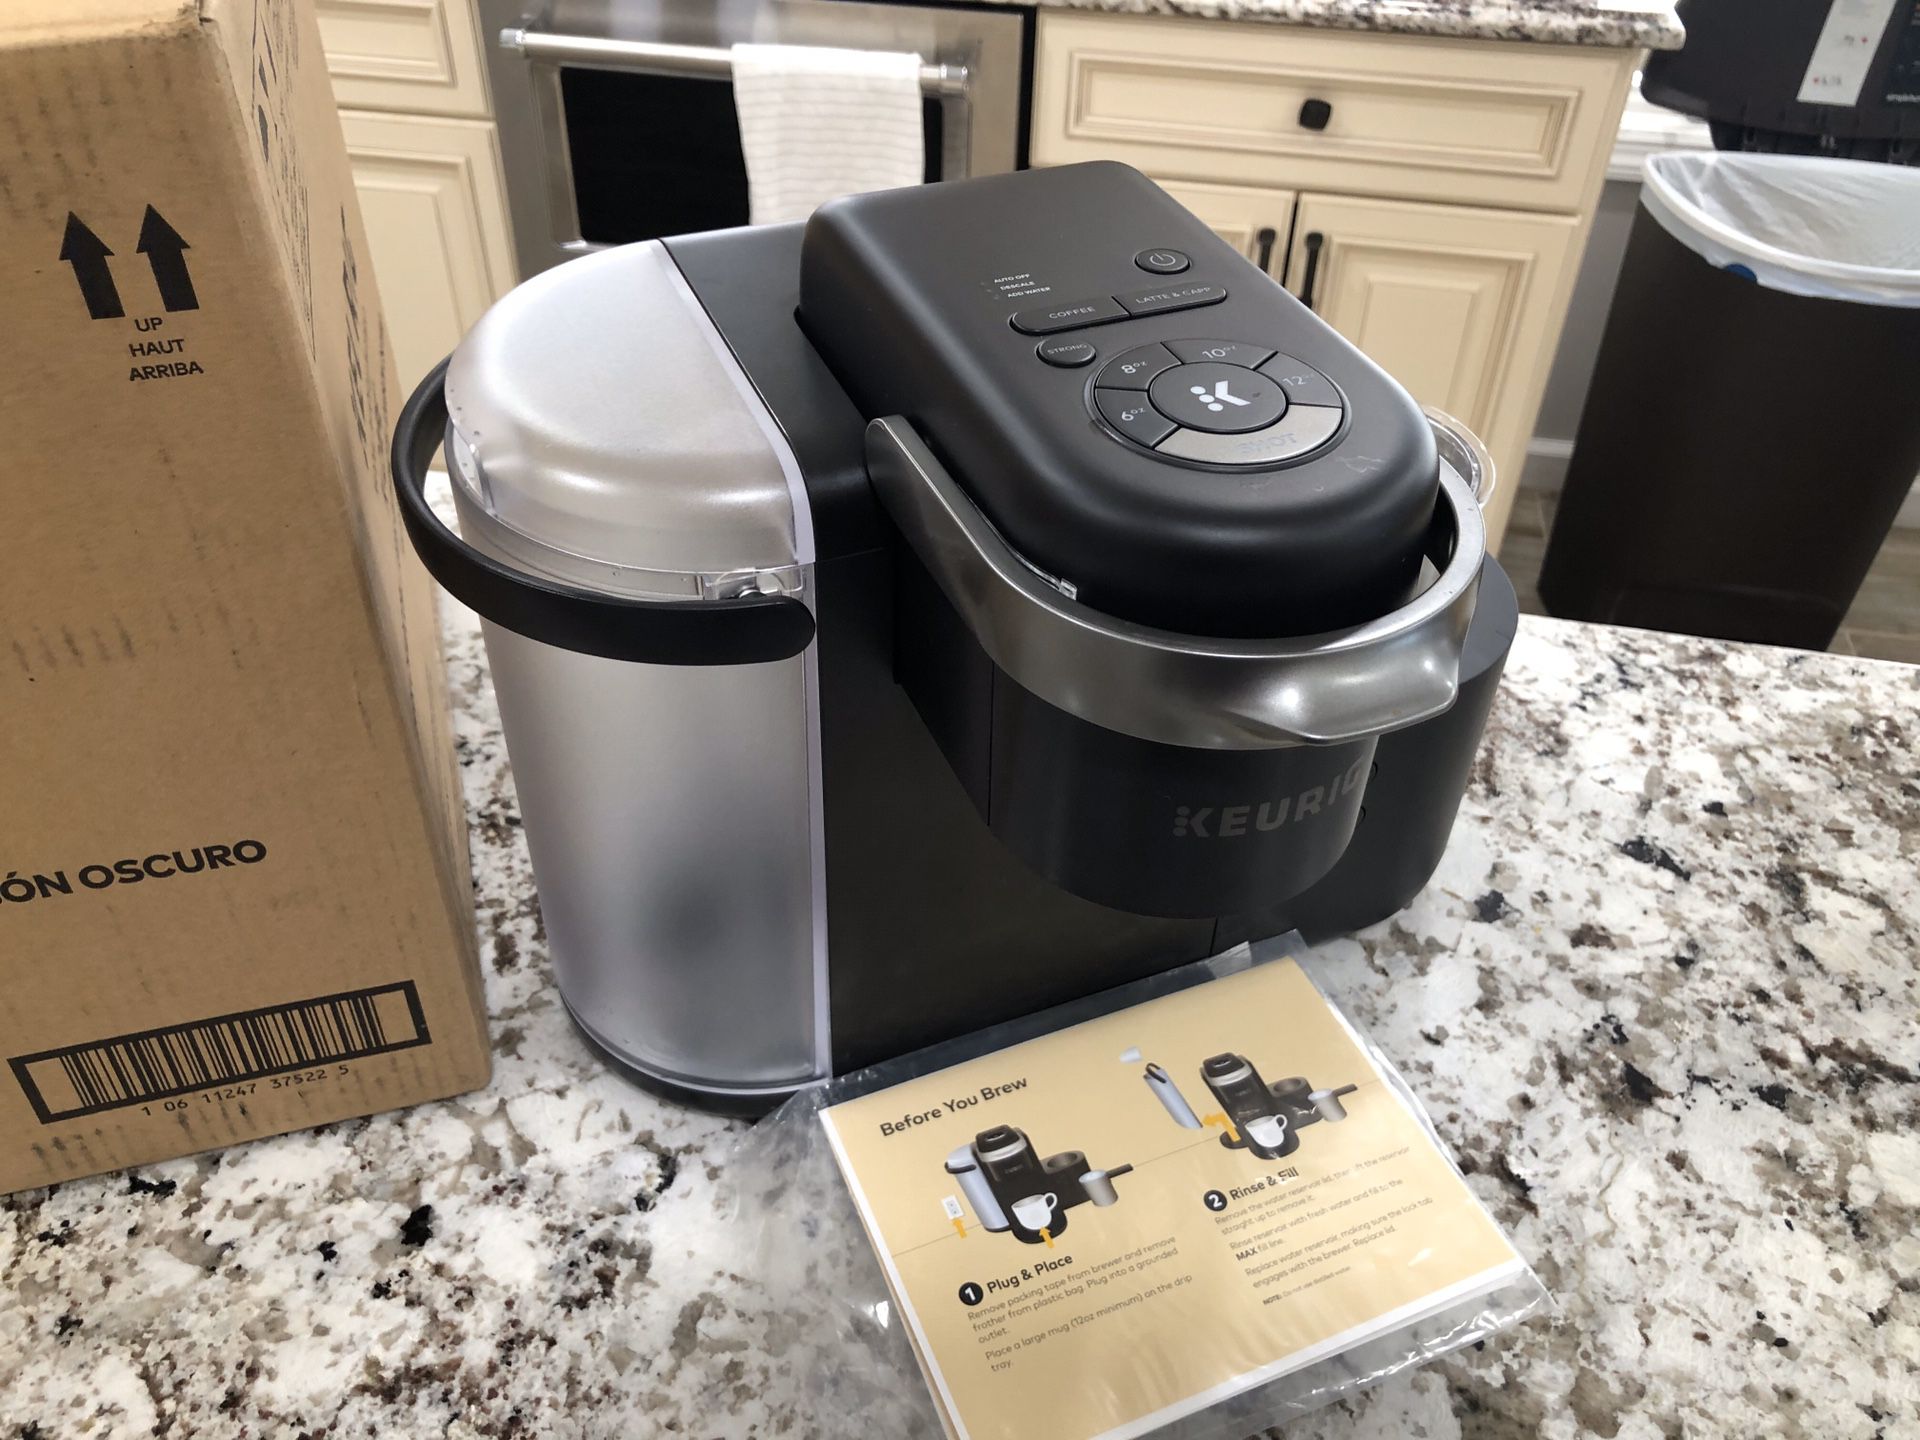 Keurig K Cafe coffee, latte, and cappuccino maker